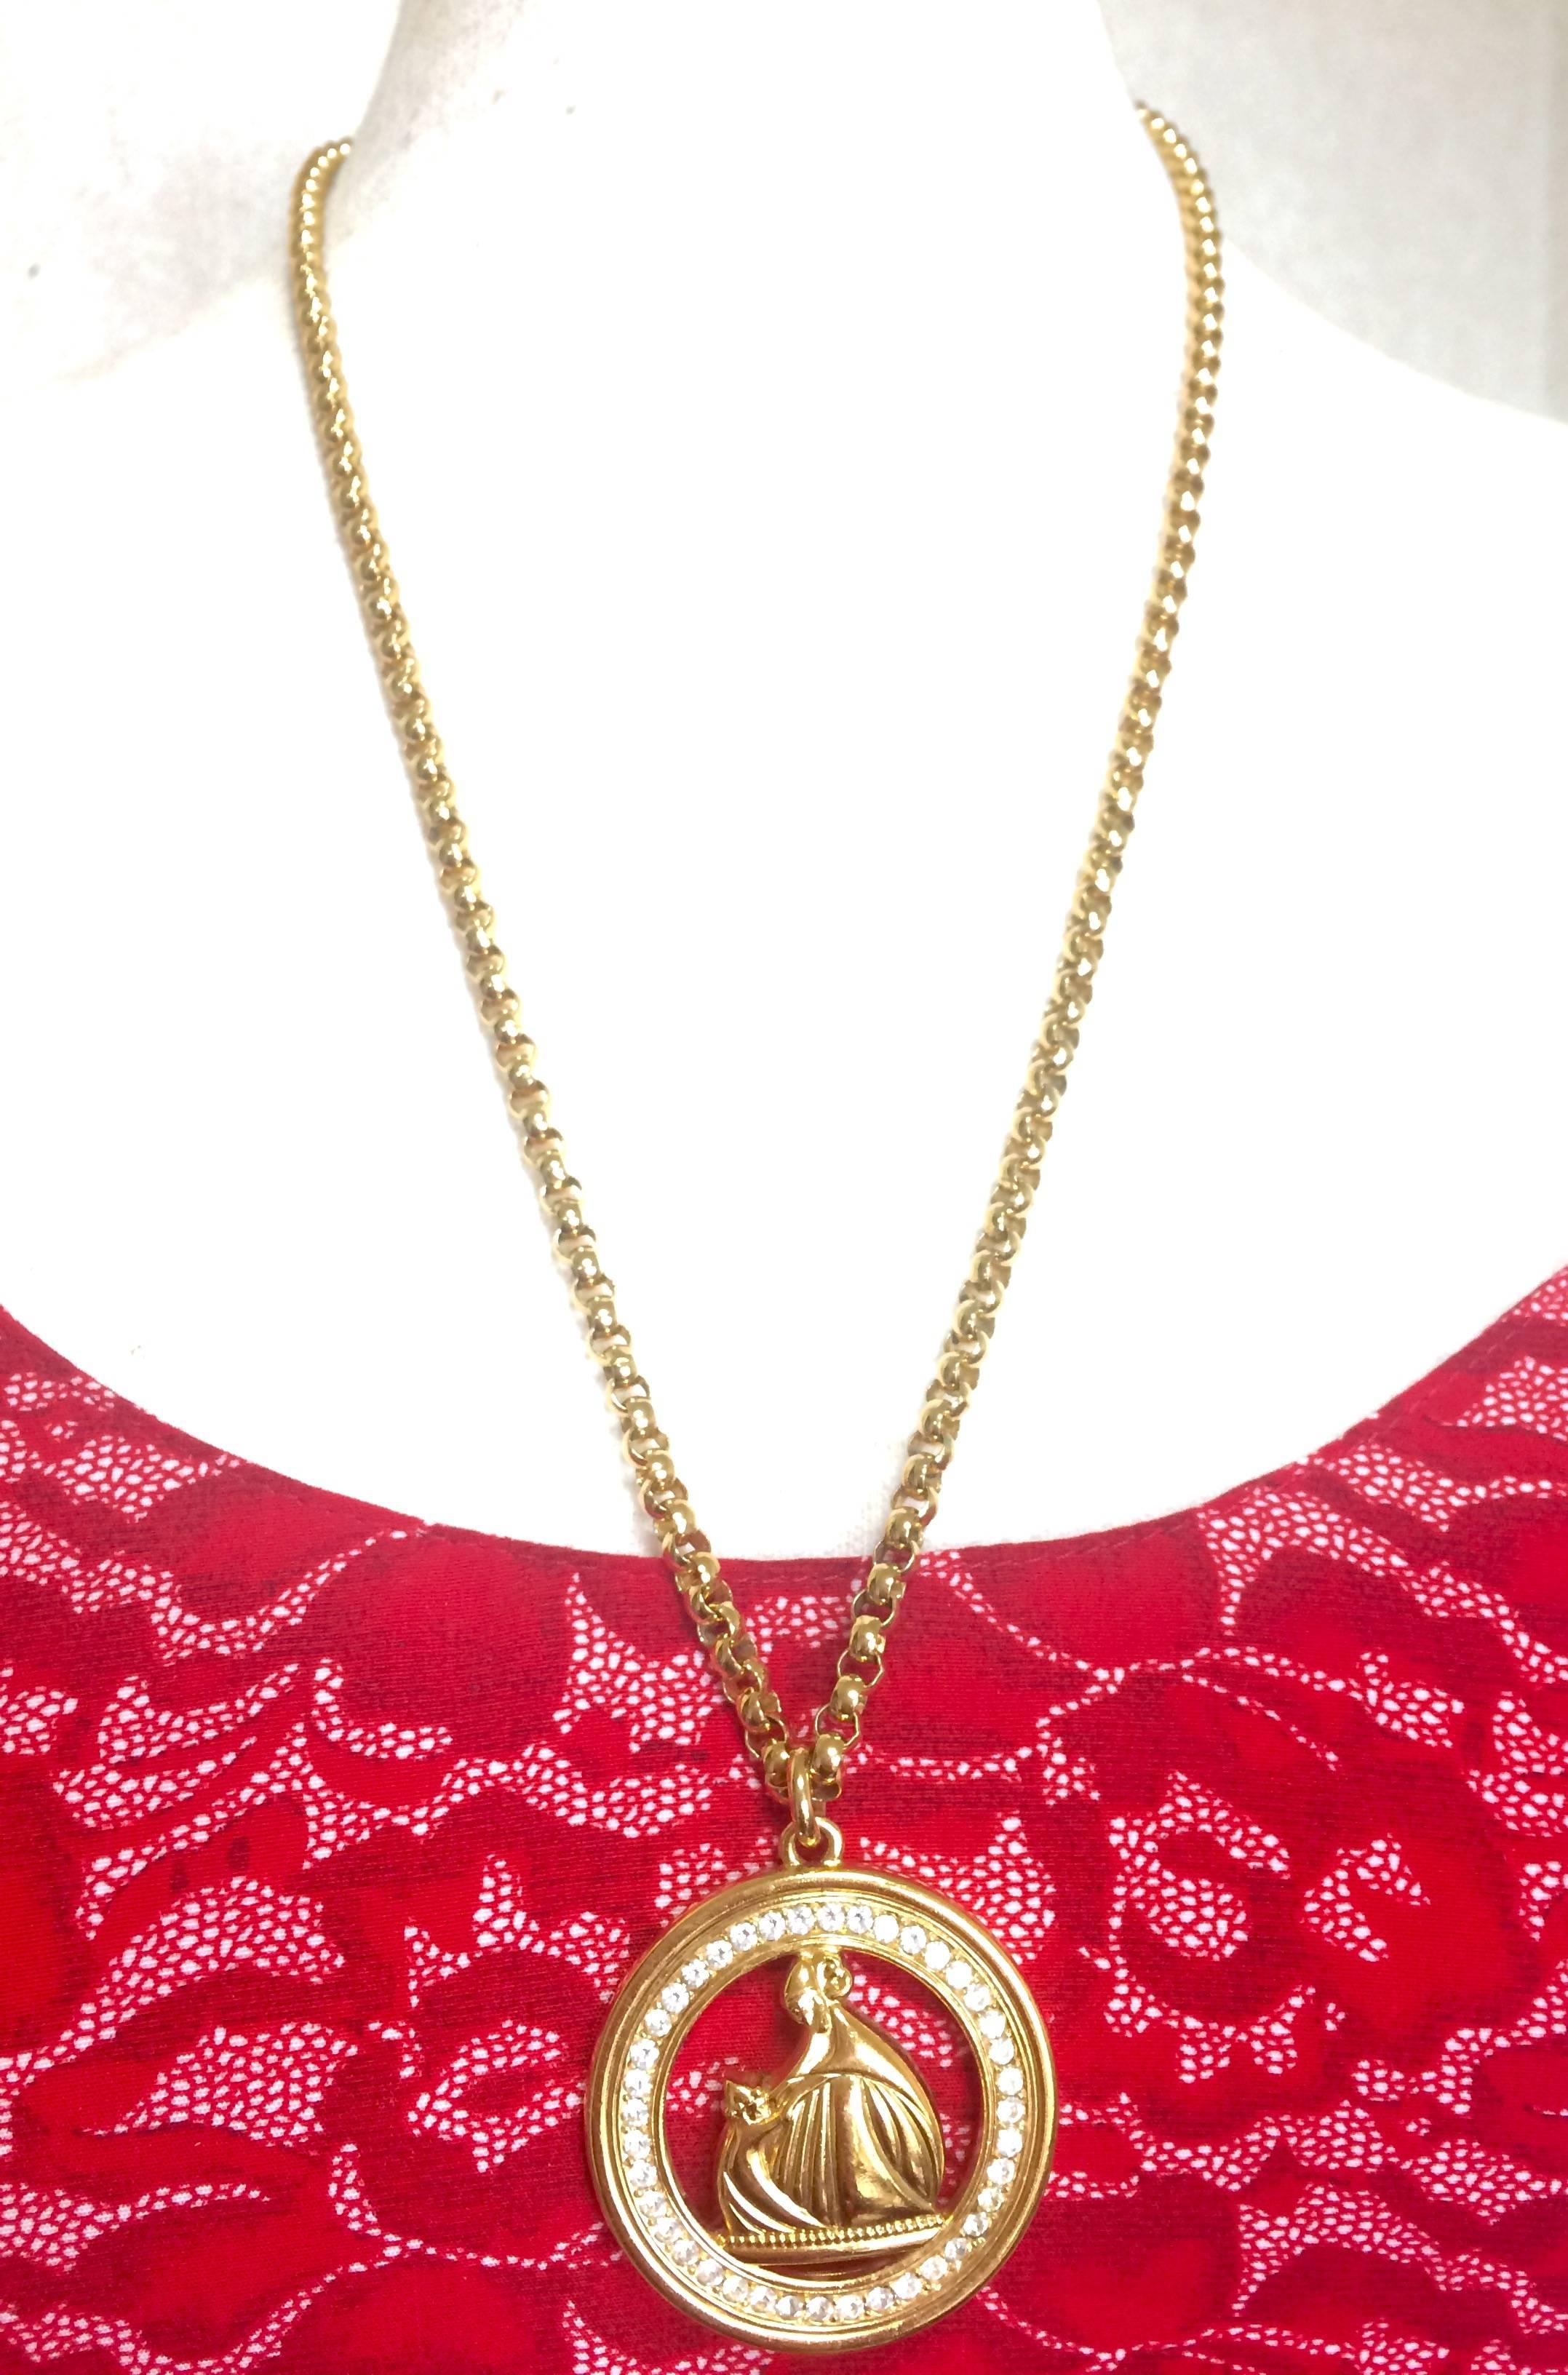 MINT. Vintage LANVIN golden chain necklace with large logo pendant top. Germany. 2